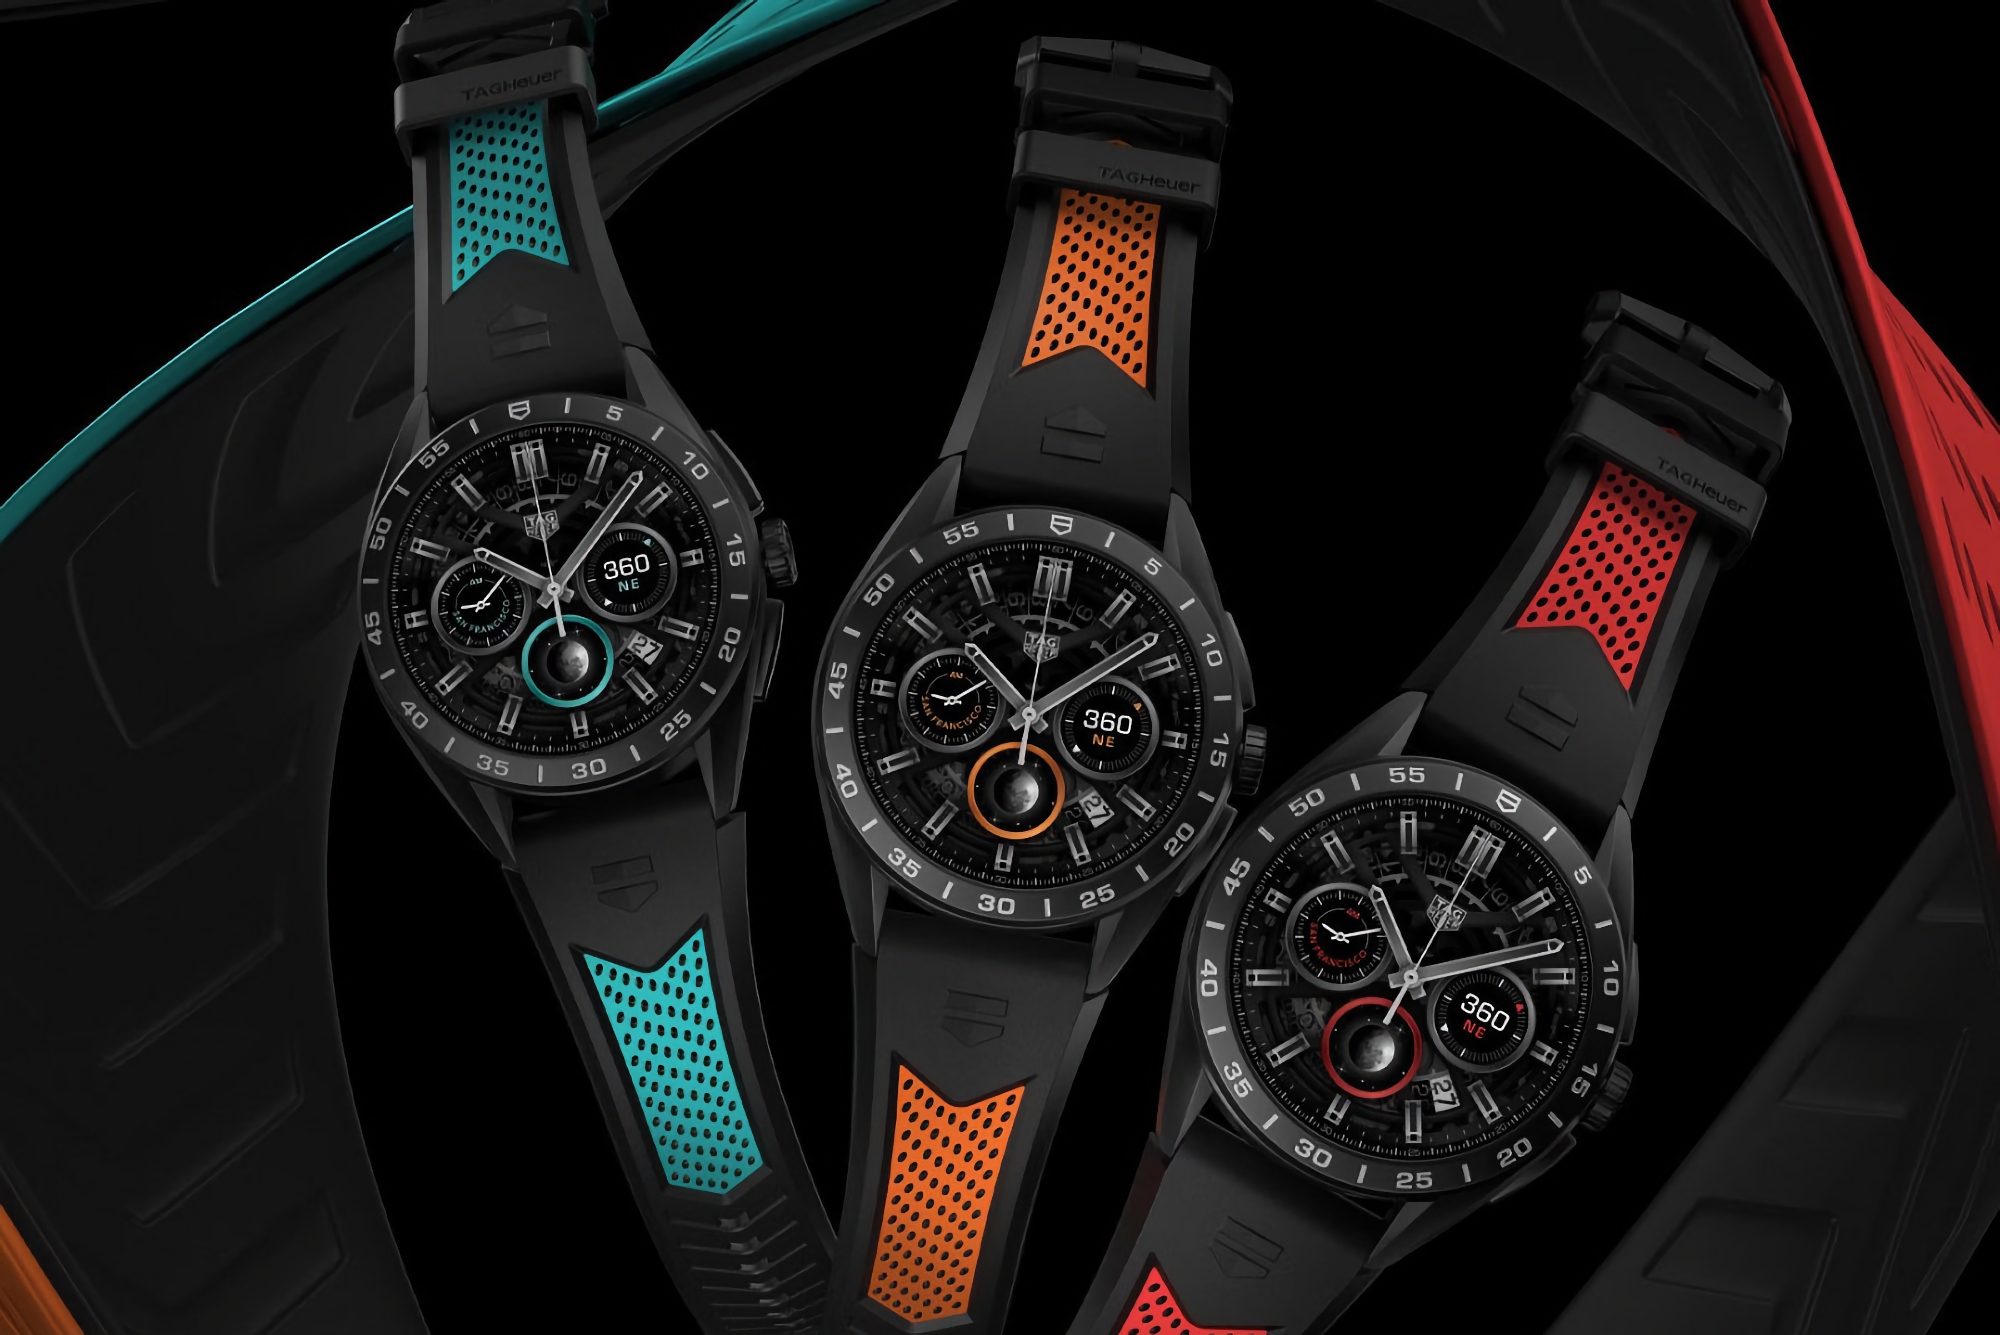 TAG Heuer has unveiled new versions of the Connected Calibre E4 premium smartwatch with Wear OS and prices starting at $2350